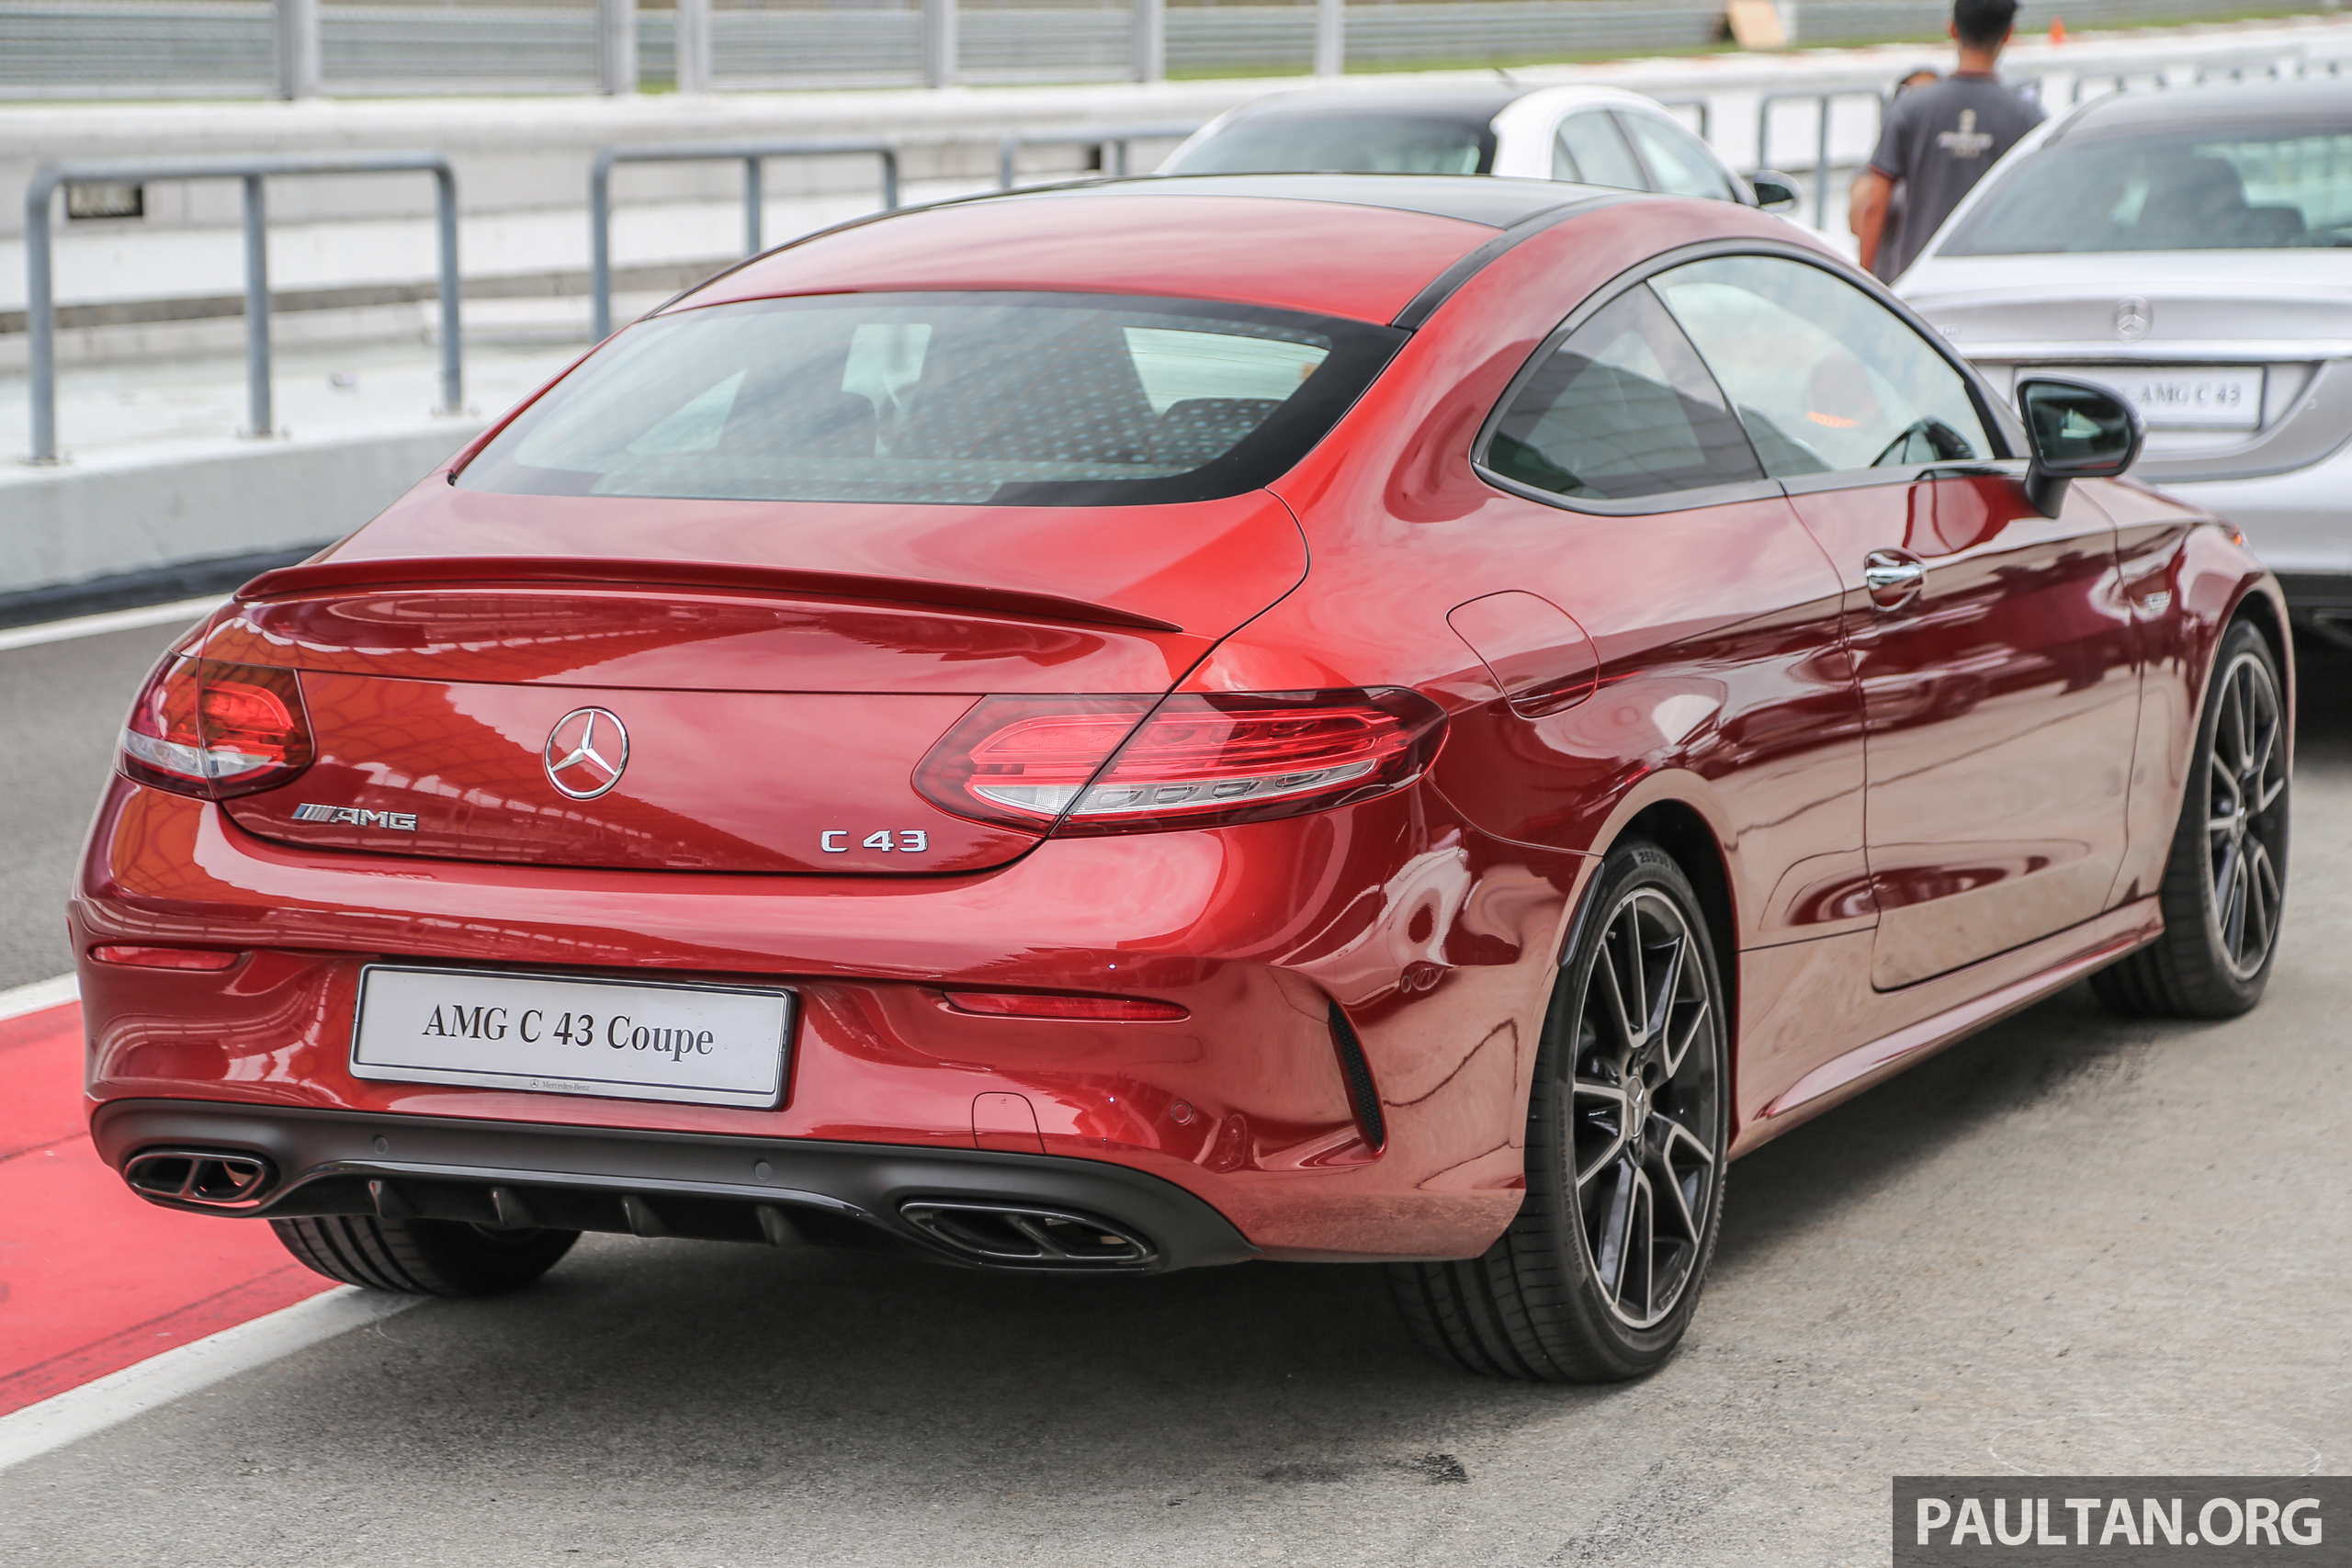 Mercedes-AMG C43 4Matic Sedan and Coupe launched in 